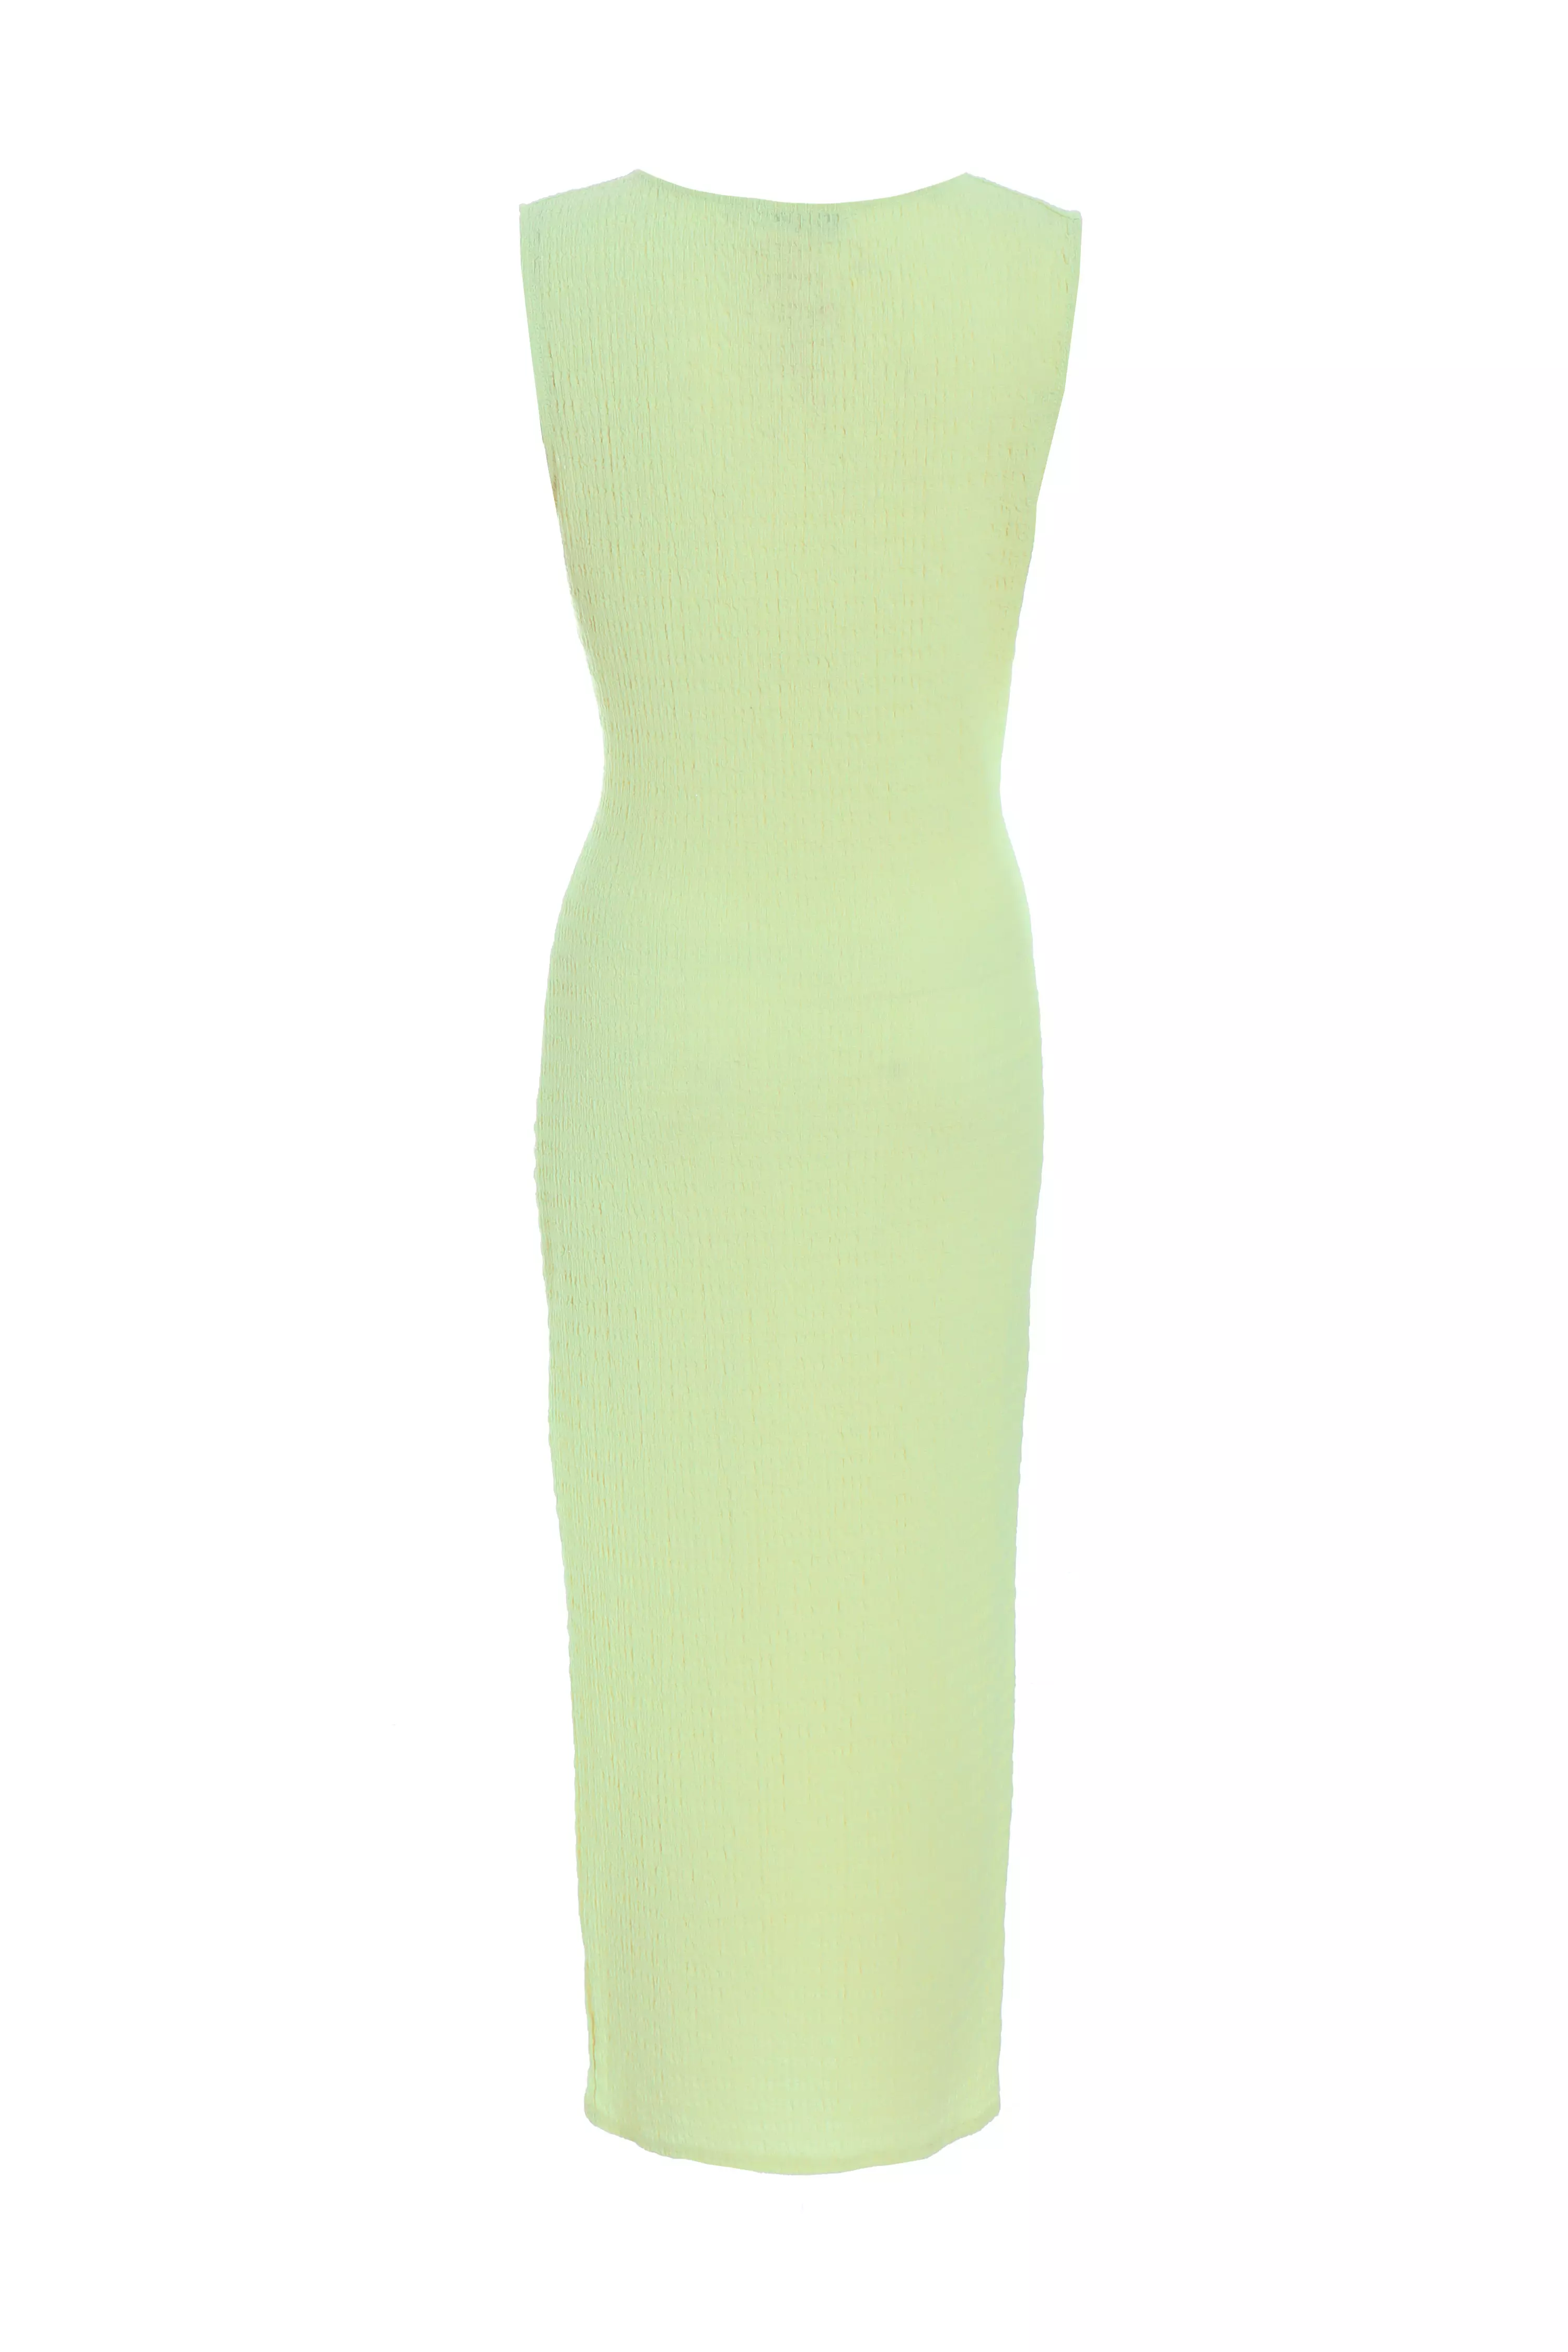 Lime Textured Cowl Neck Midaxi Dress - QUIZ Clothing